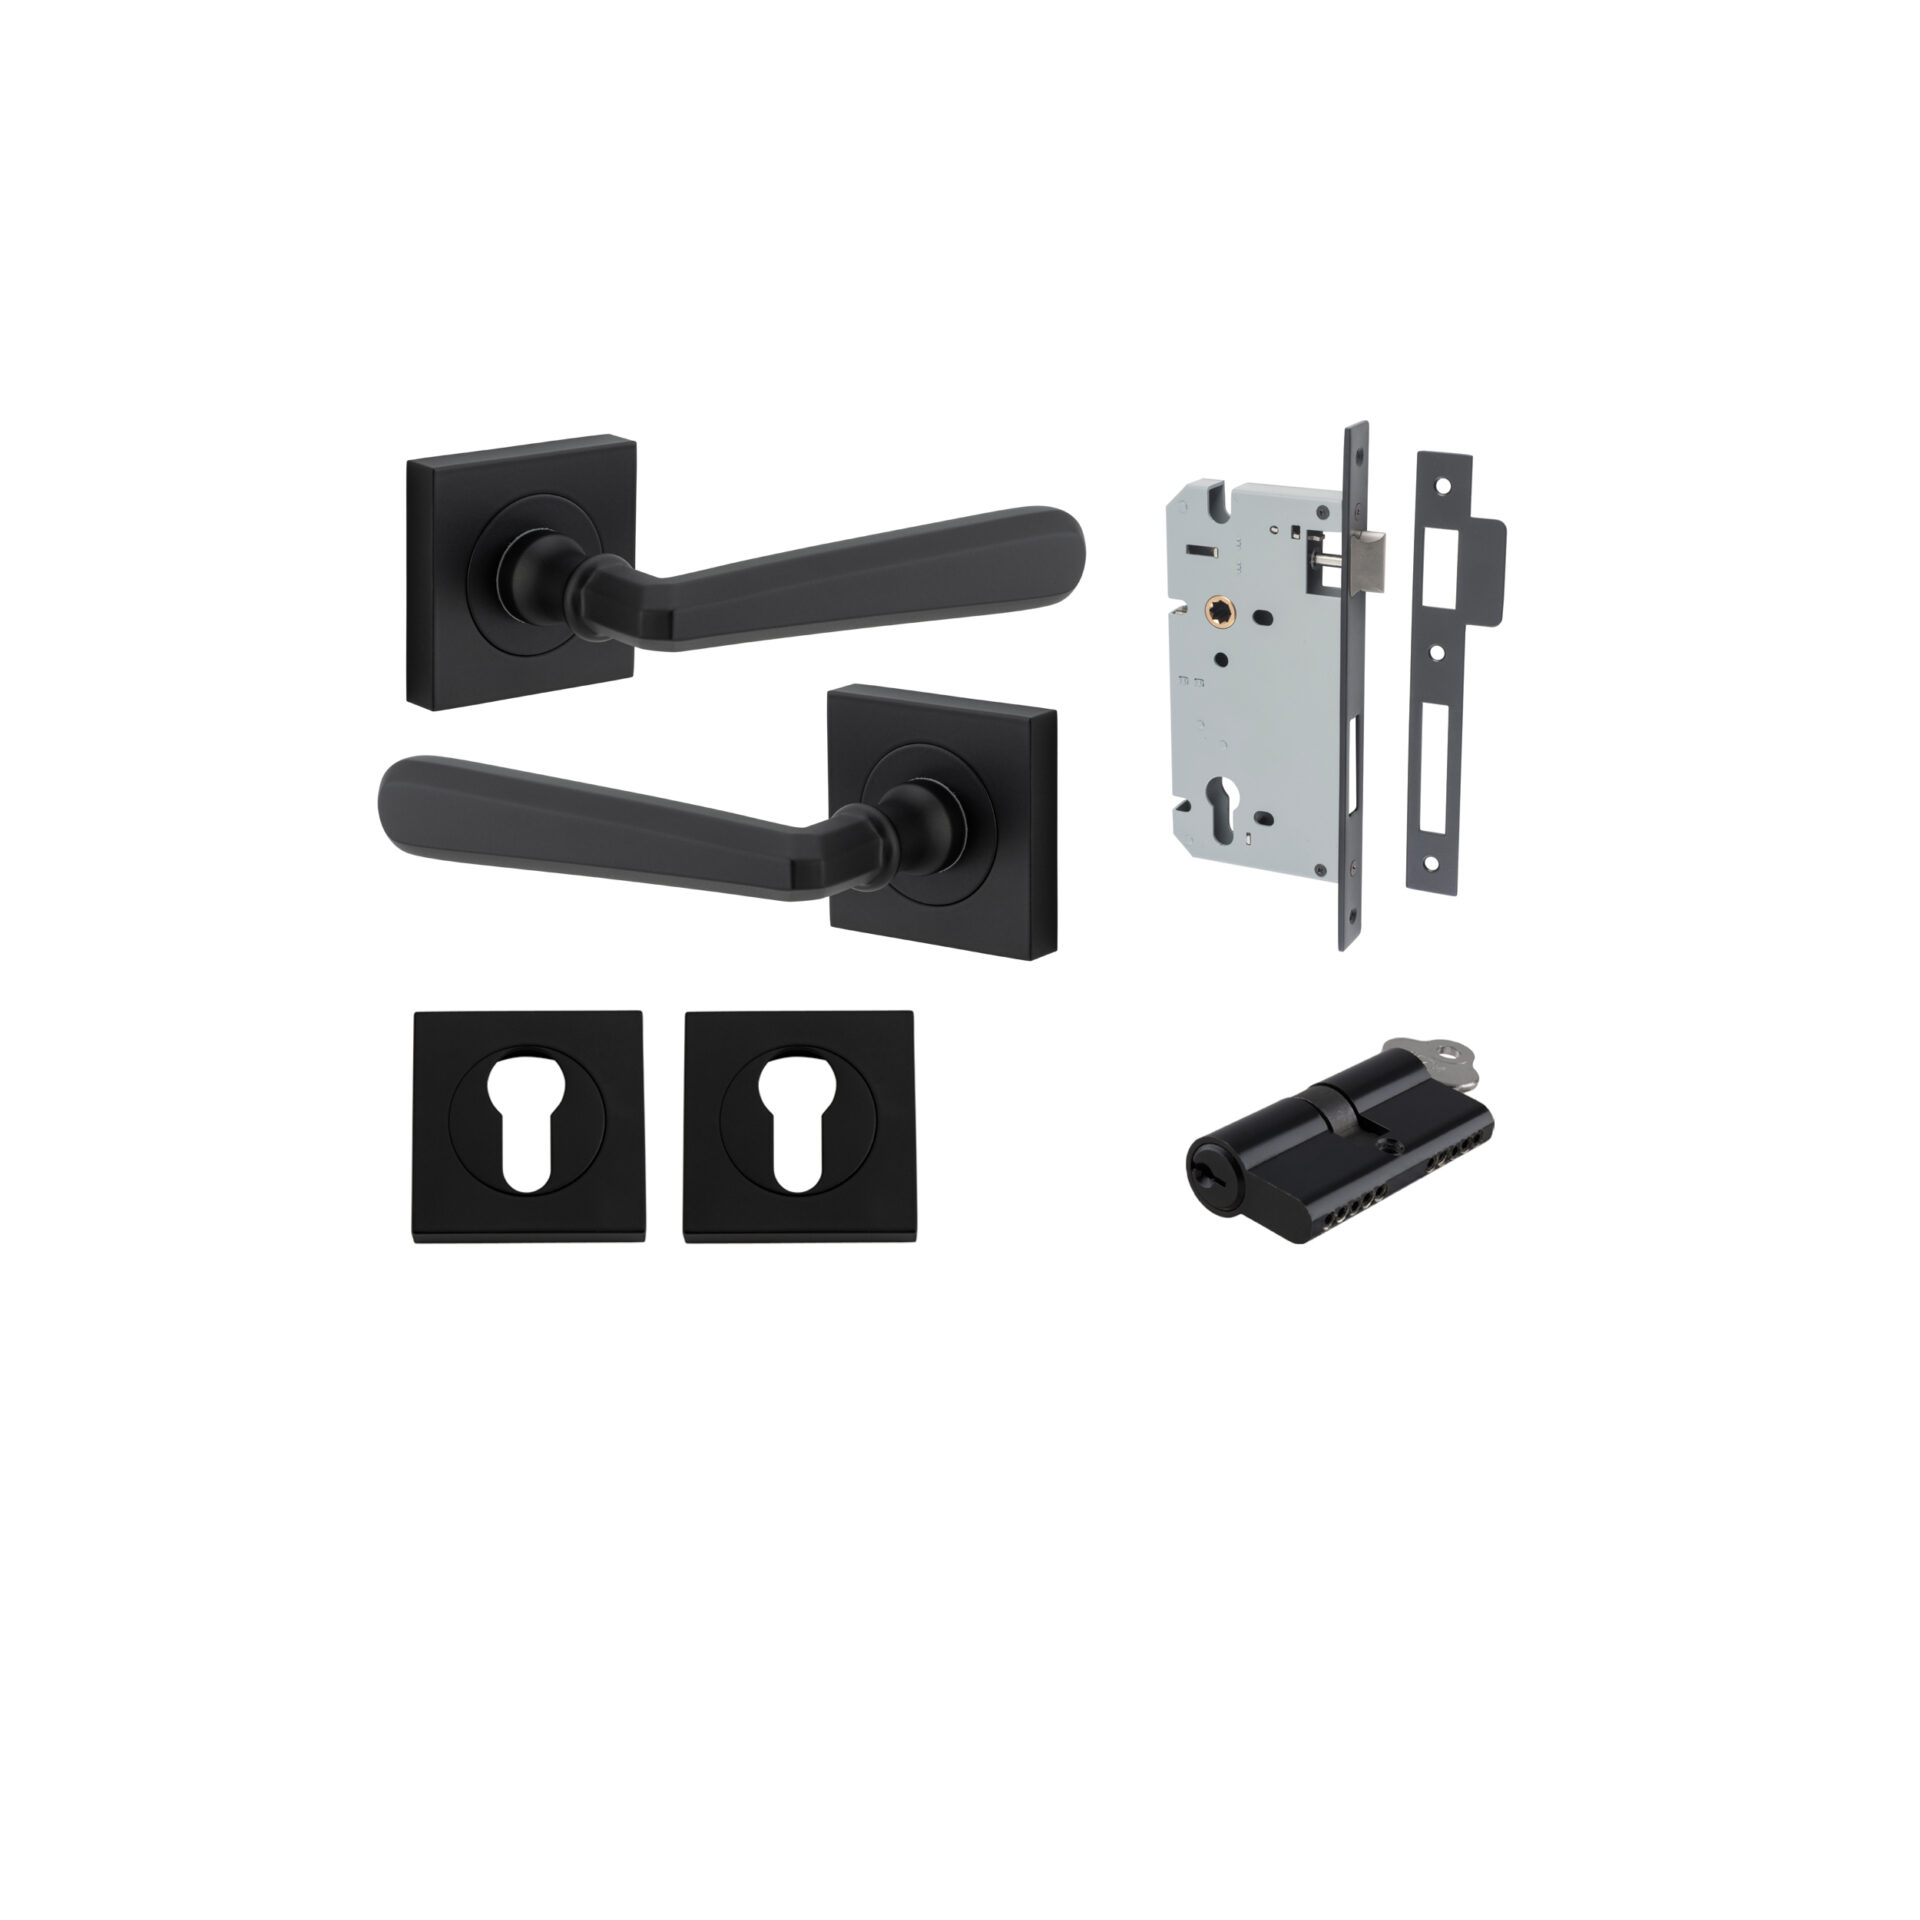 Copenhagen Lever - Square Rose Entrance Kit with Separate High Security Lock